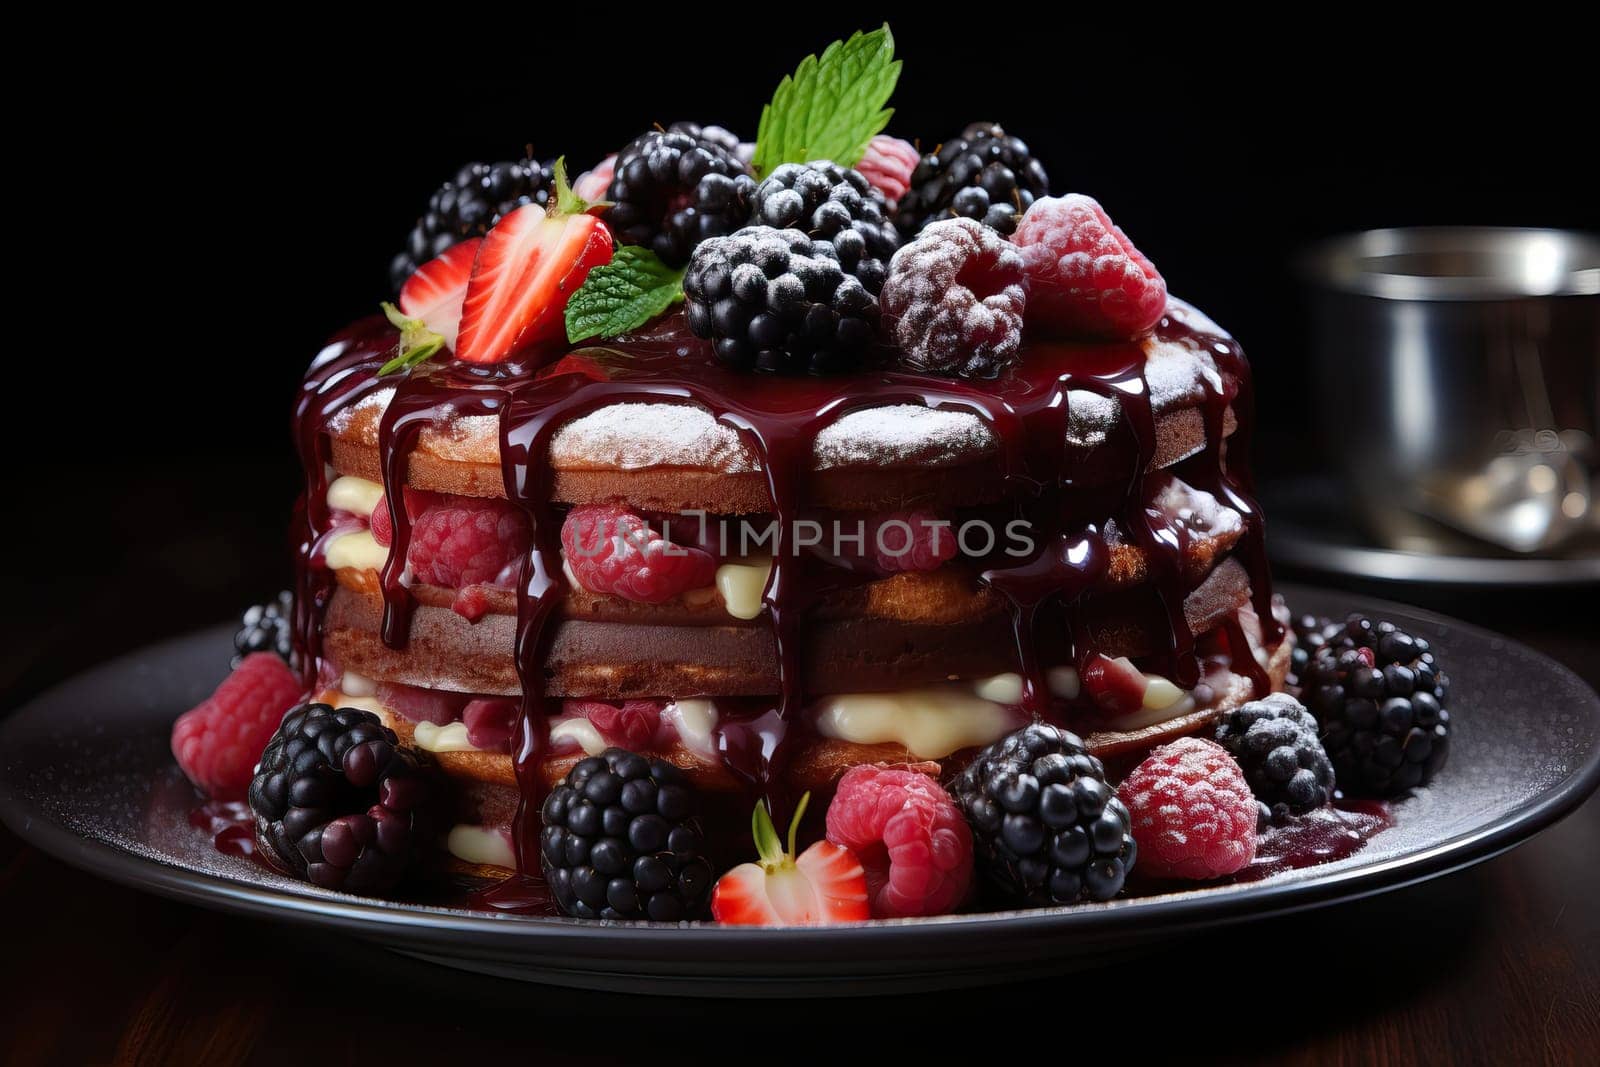 A piece of chocolate sponge cake with white cream and berries on a black background.